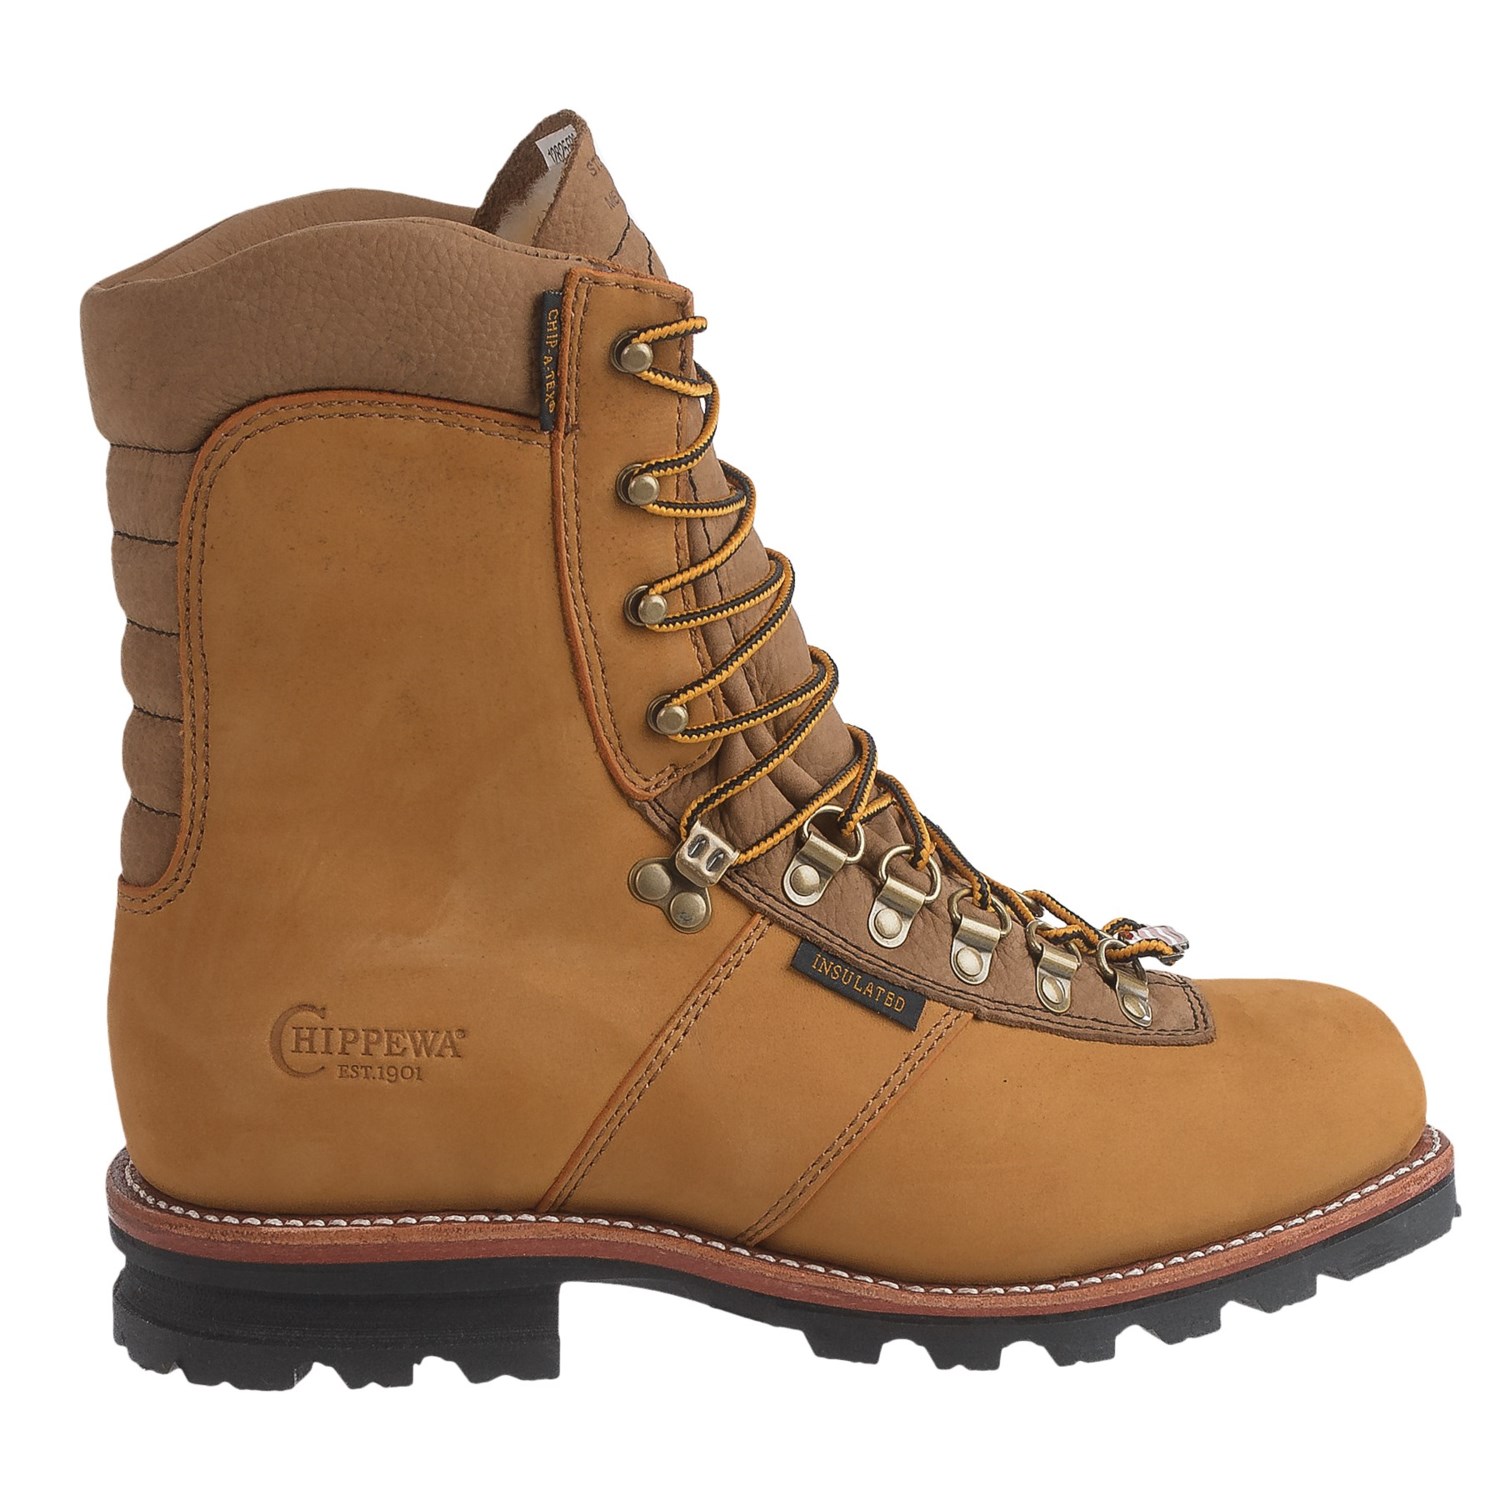 Chippewa Arctic Rugged Leather Work Boots (For Men) - Save 48%